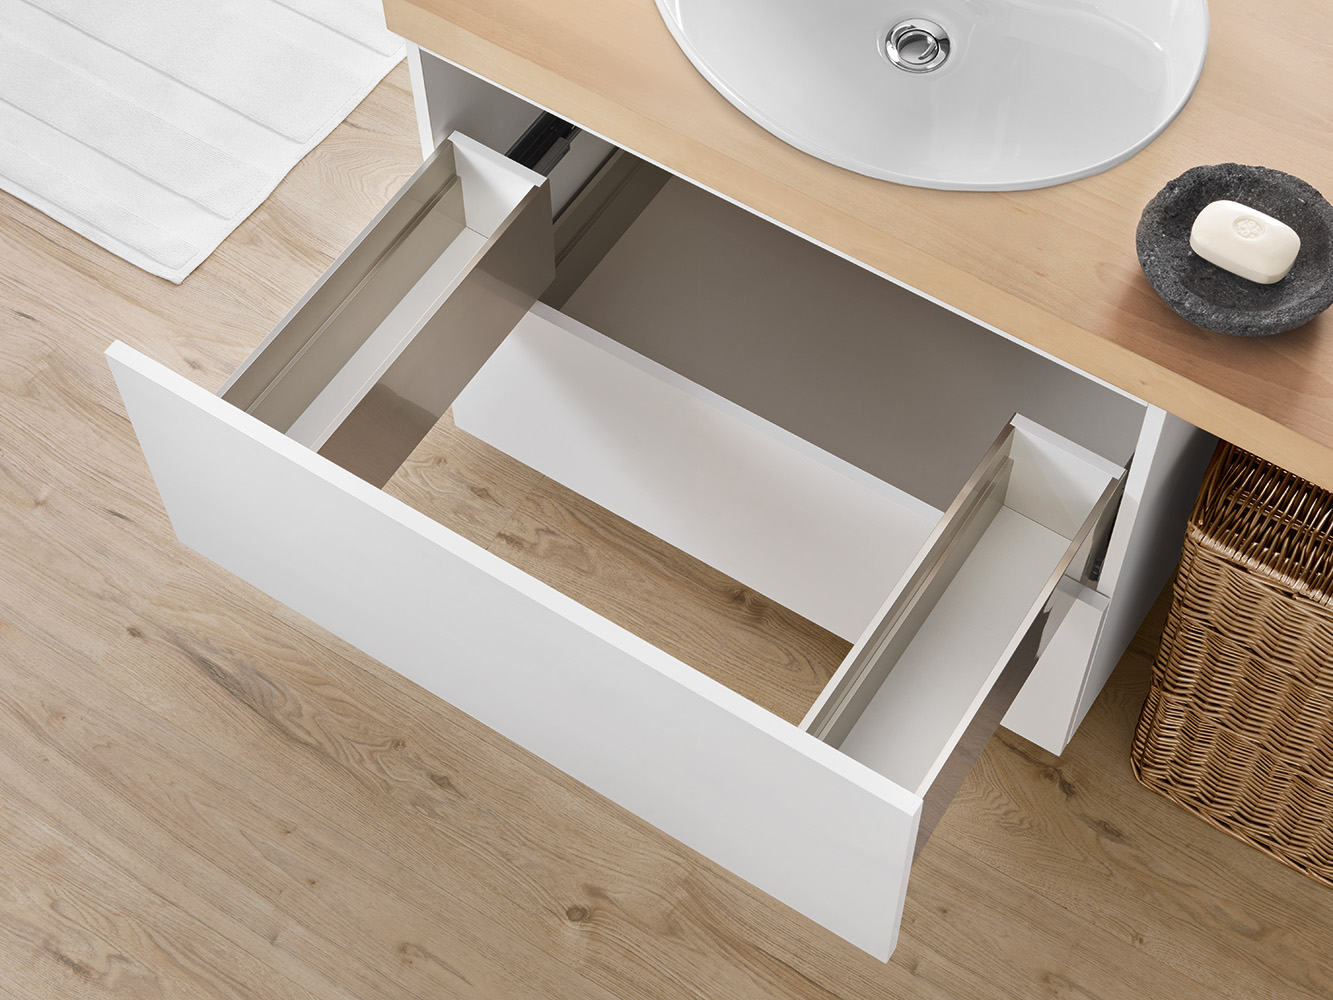 LINEABOX Under-sink - 2-sided drawer - H 178 mm